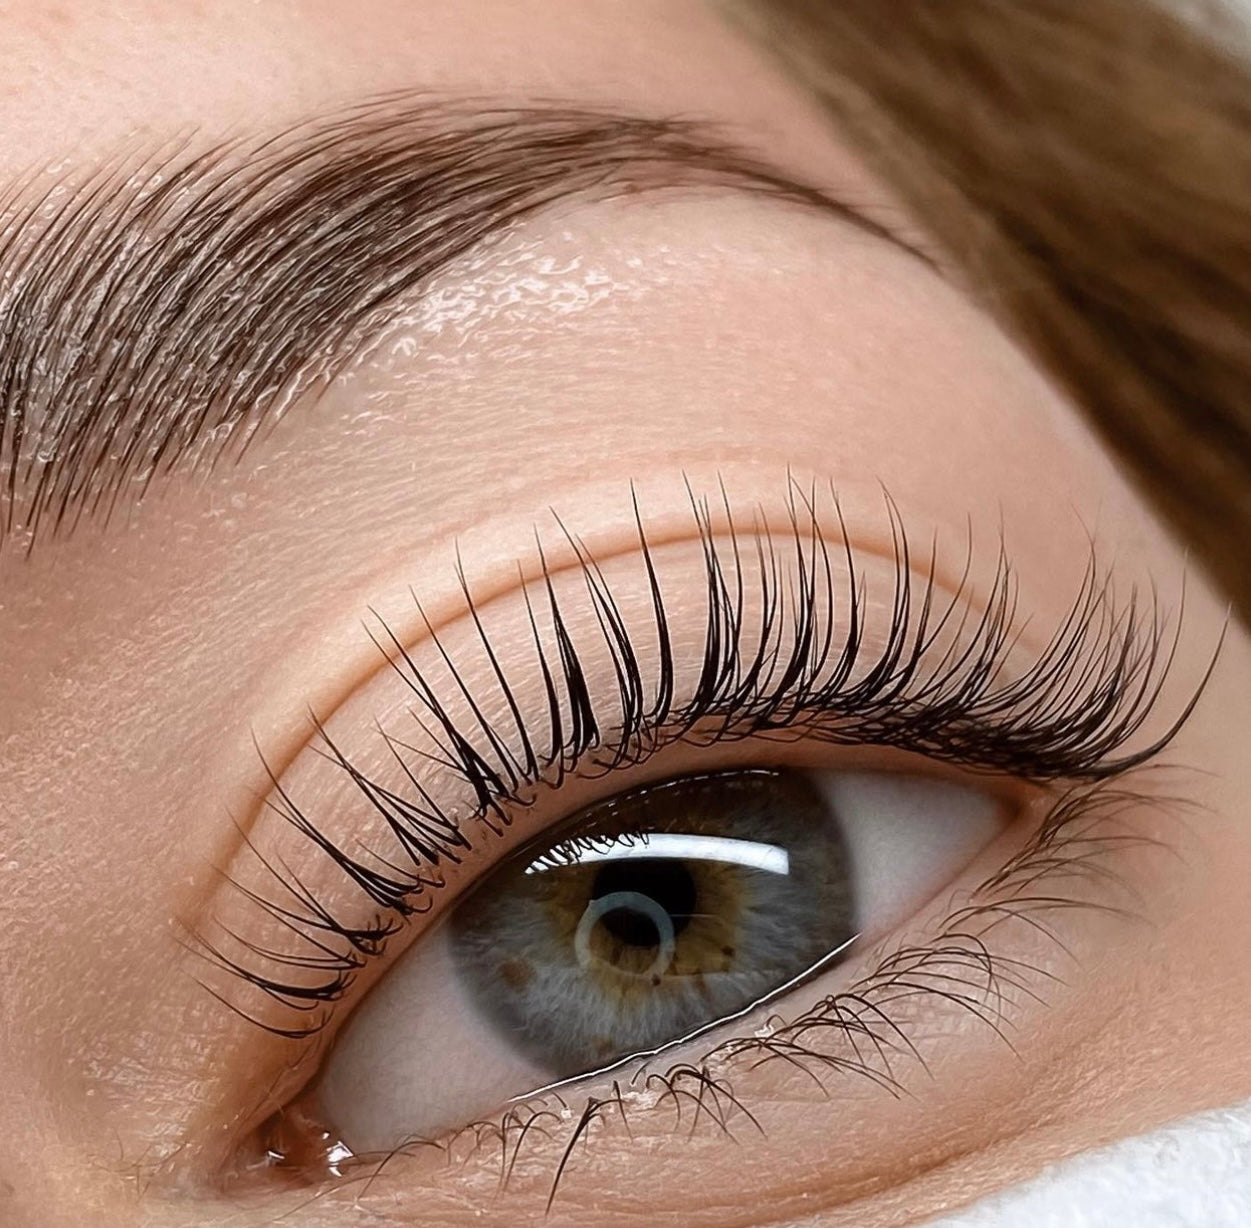 Should I tint my lashes before getting eyelash extensions done?